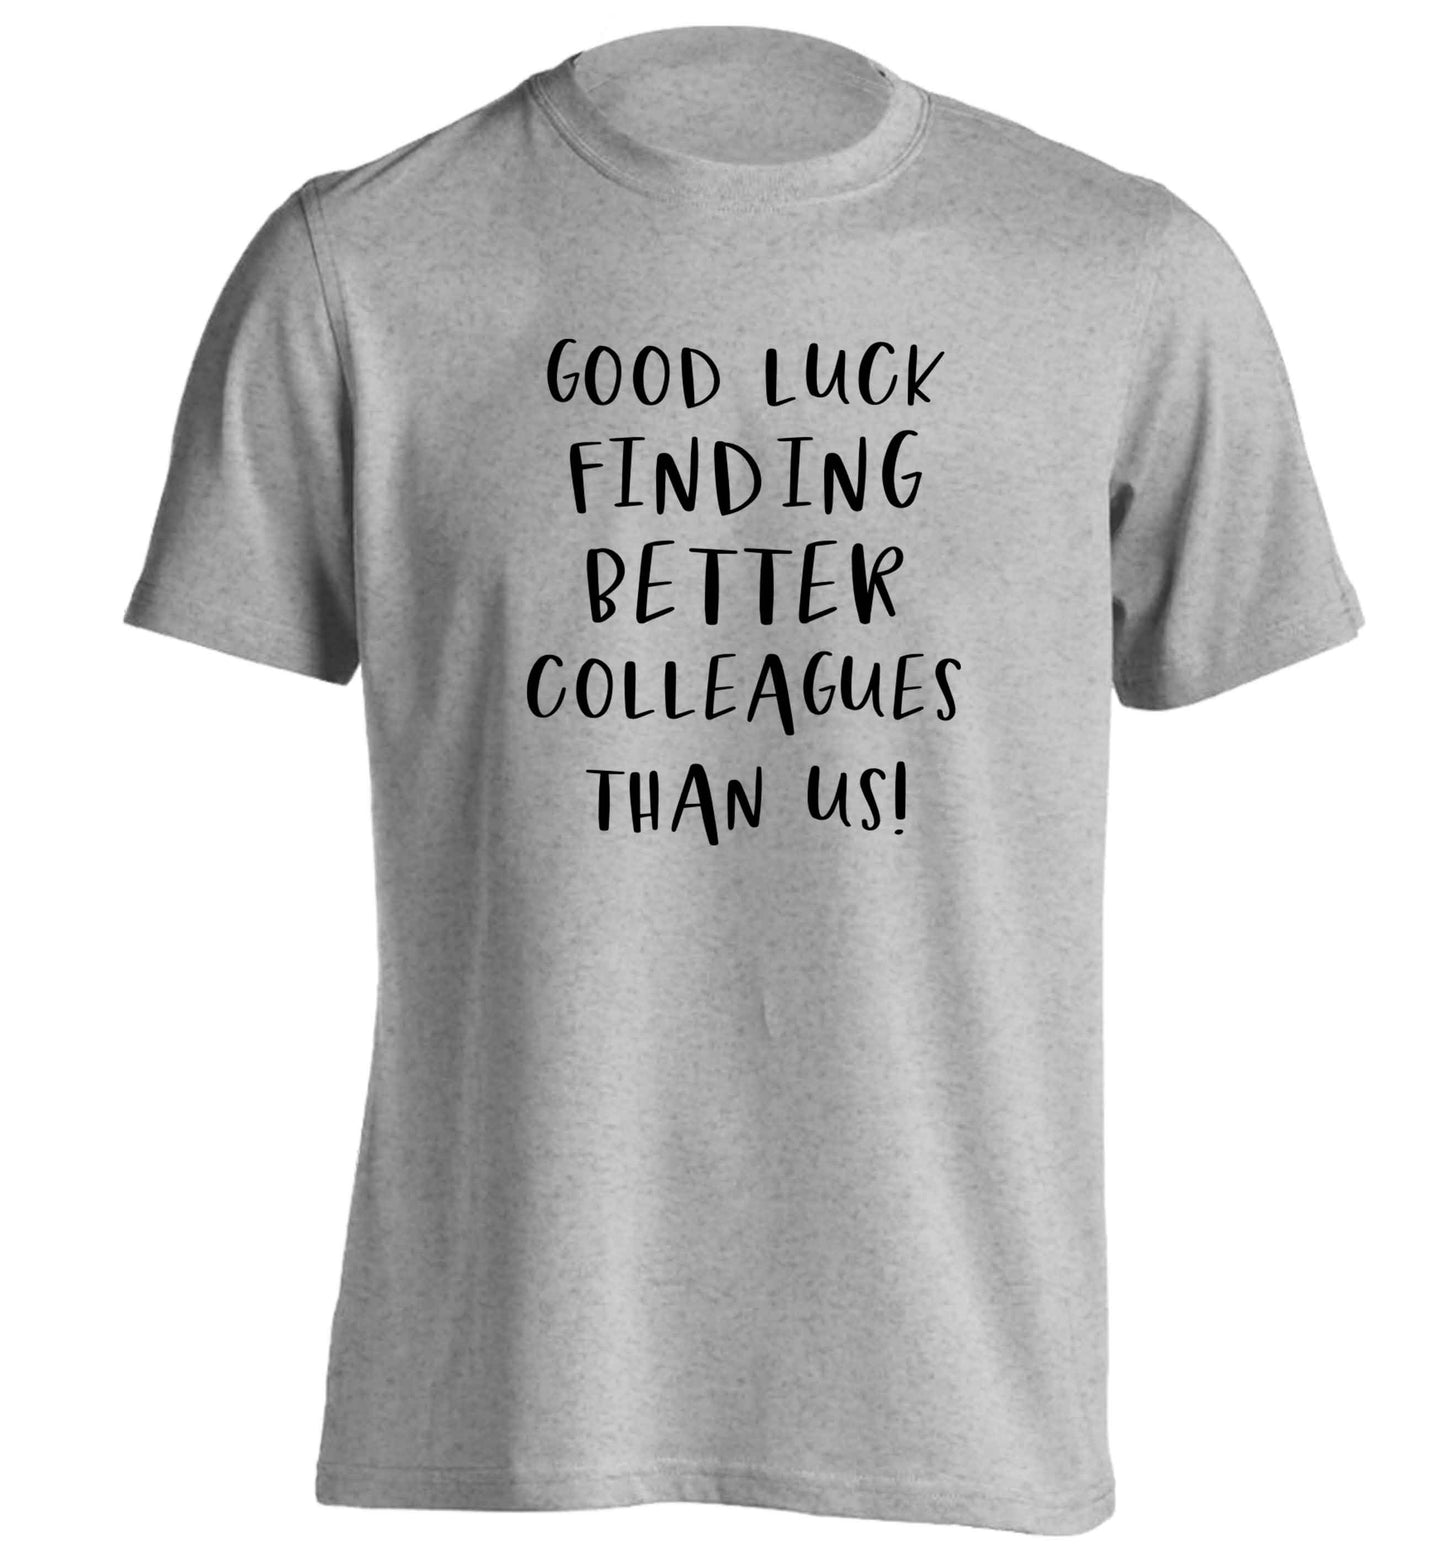 Good luck finding better colleagues than us! adults unisex grey Tshirt 2XL